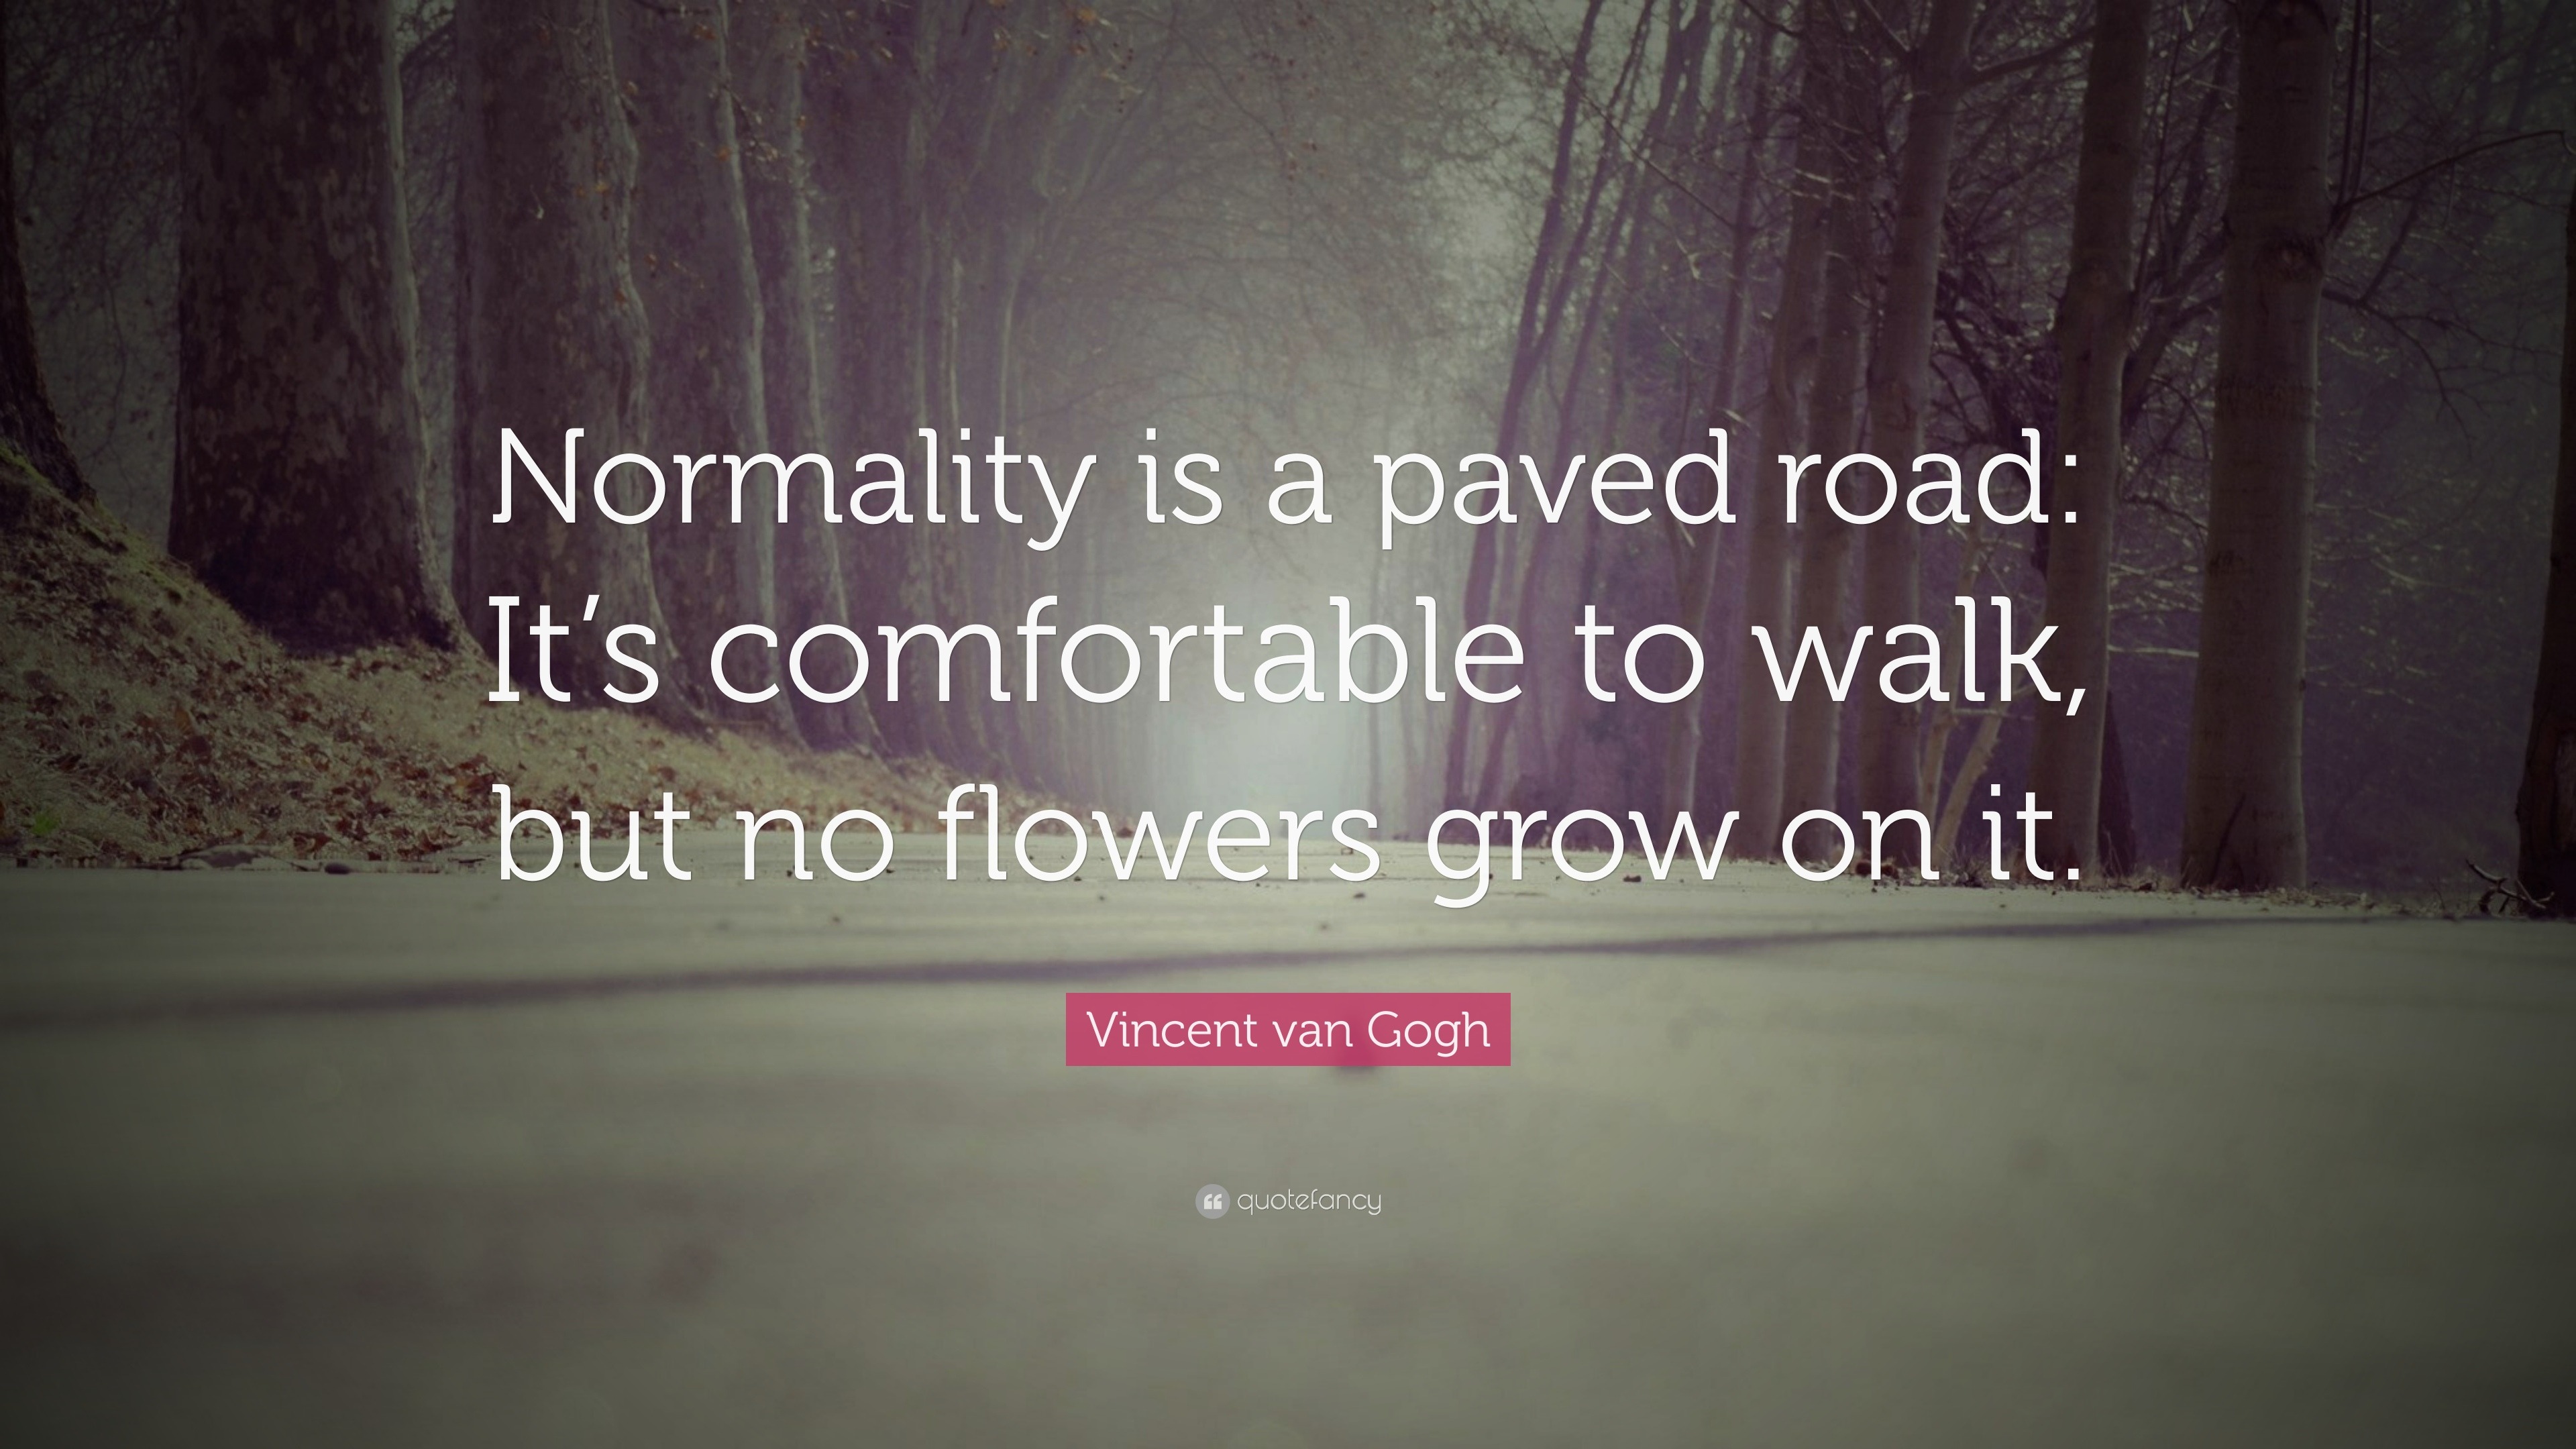 Vincent Van Gogh Quotes Normality - Avrit Carlene